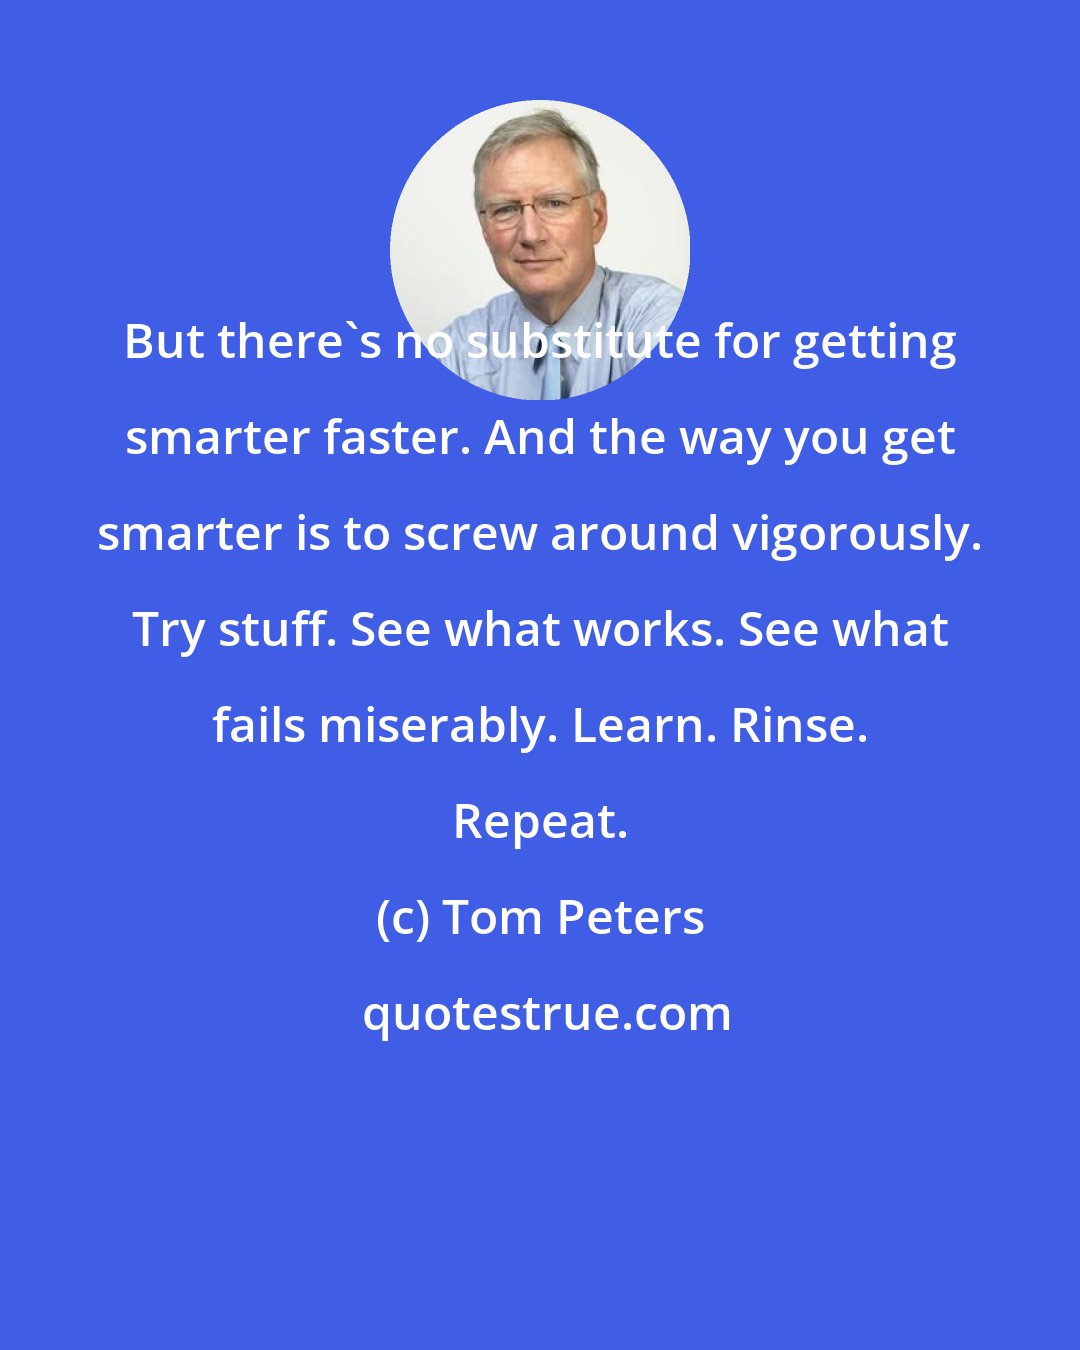 Tom Peters: But there's no substitute for getting smarter faster. And the way you get smarter is to screw around vigorously. Try stuff. See what works. See what fails miserably. Learn. Rinse. Repeat.